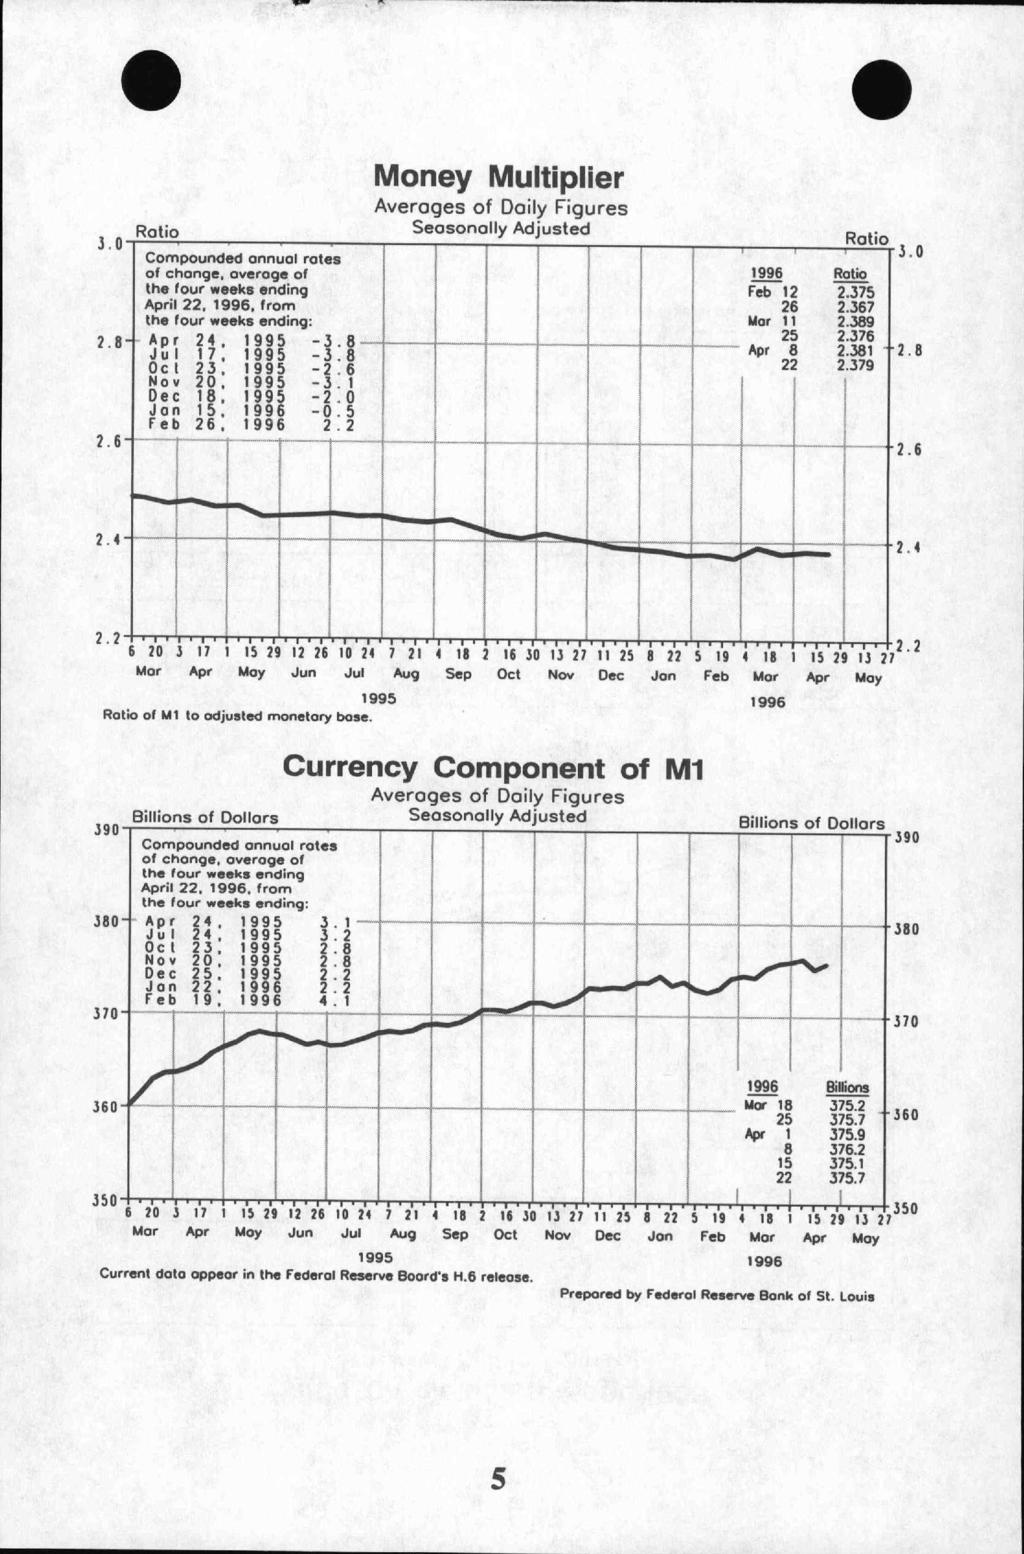 Money Multiplier 3.0 Ratio Seasonally Adjusted 2.8- Compounded annual rates of change, overage of the four weeks ending April 22,, from the four weeks ending: Apr 24. JuI 17, Oct 23. Nov 20, 1995 -J.